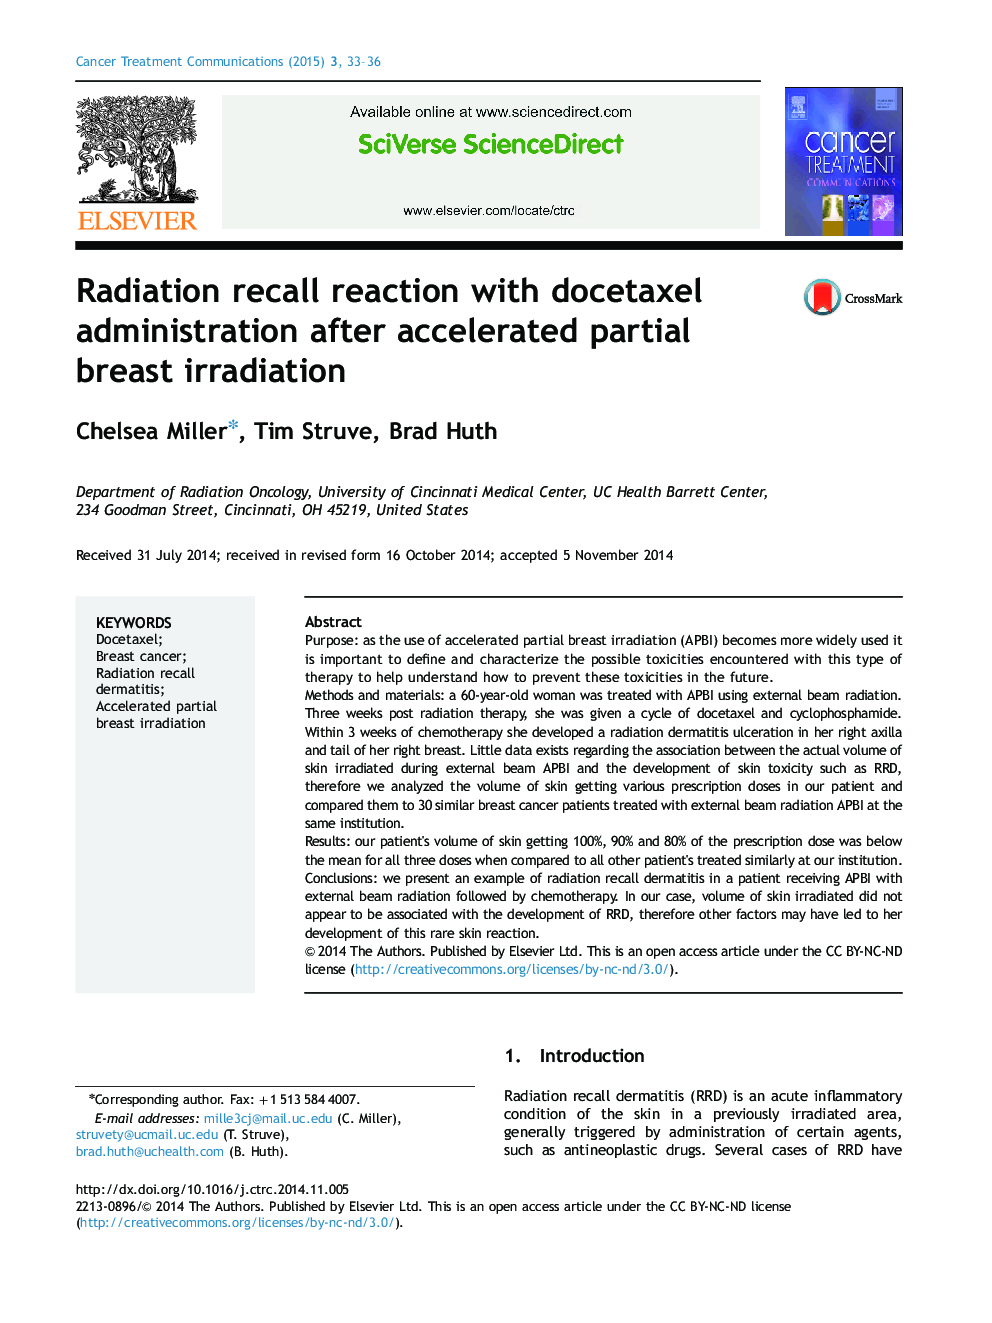 Radiation recall reaction with docetaxel administration after accelerated partial breast irradiation